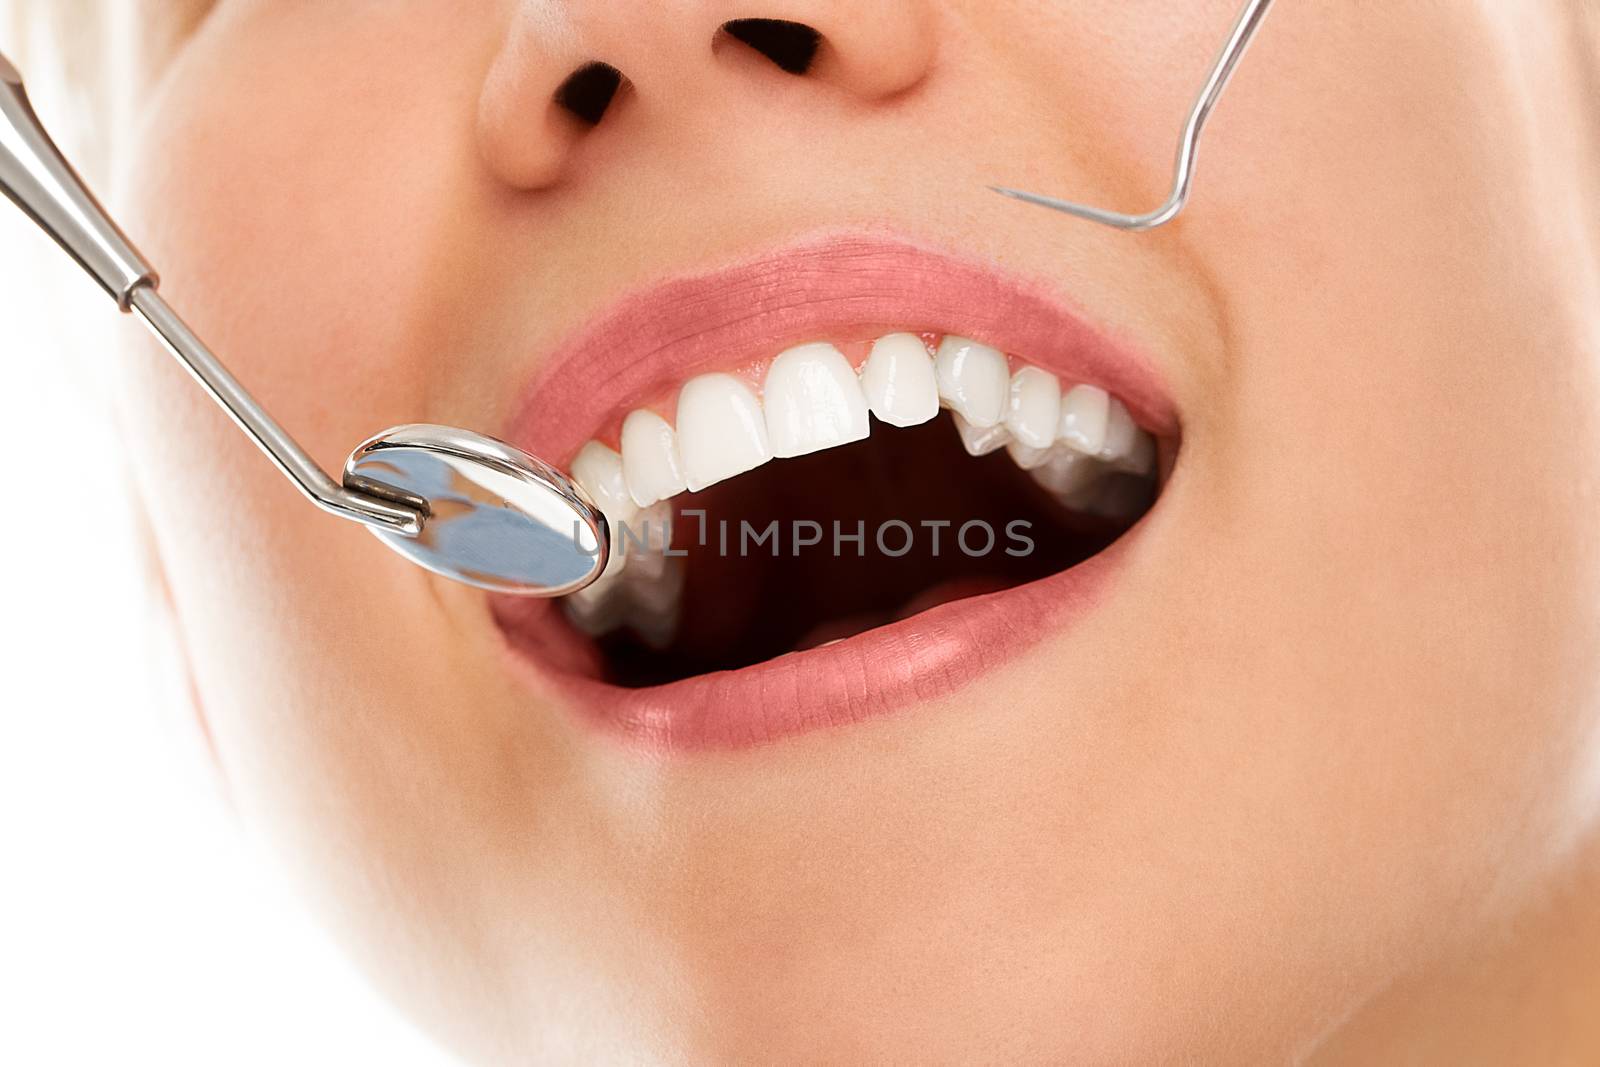 A woman is smiling while being at the dentist